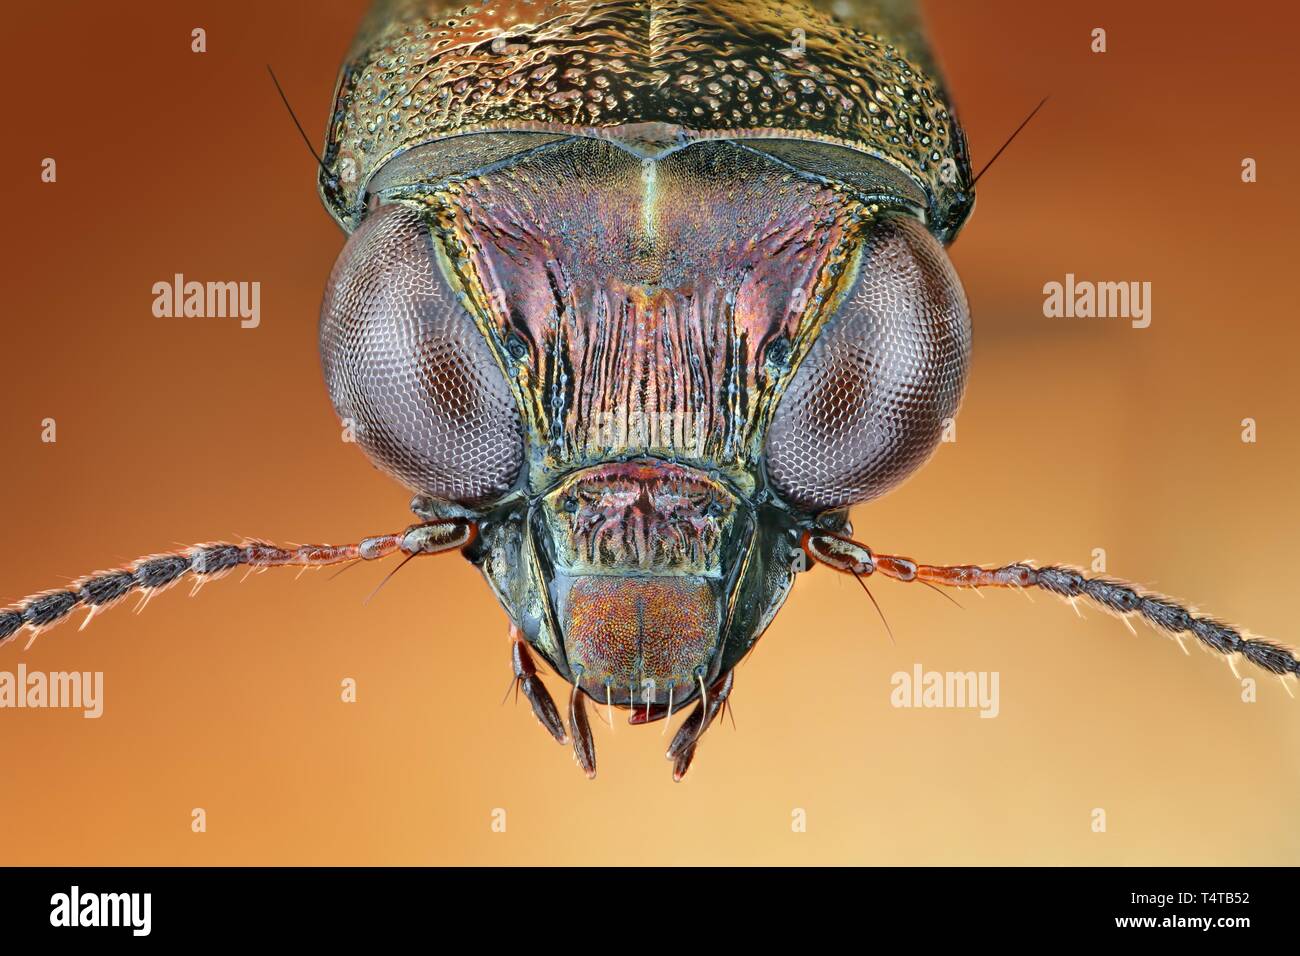 Head of a Notiophilus (Notiophilus) in frontal view Stock Photo